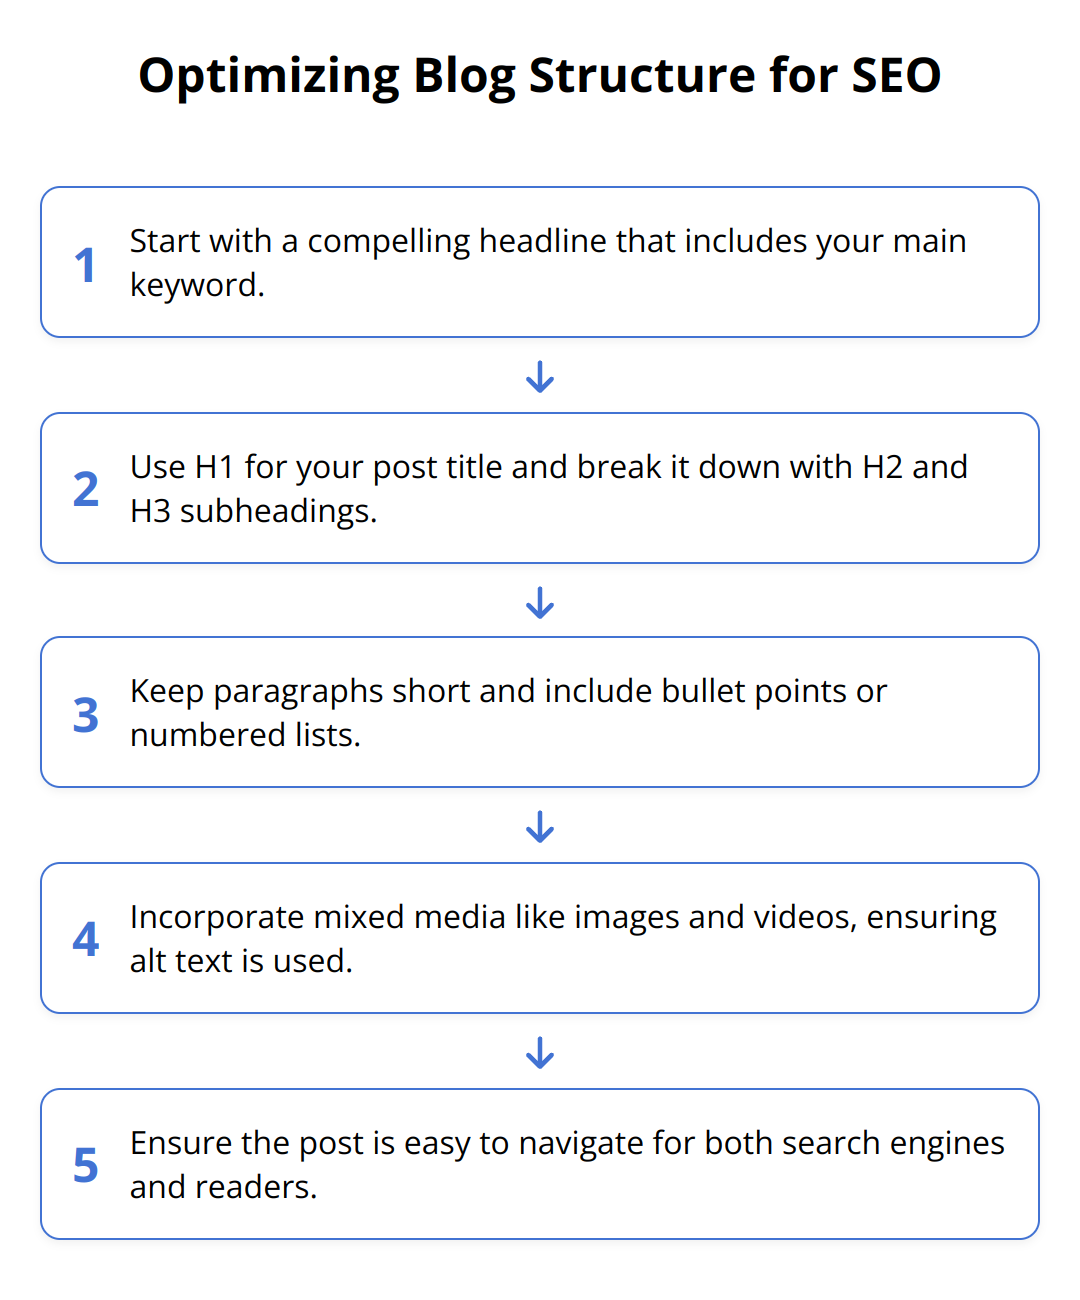 Flow Chart - Optimizing Blog Structure for SEO